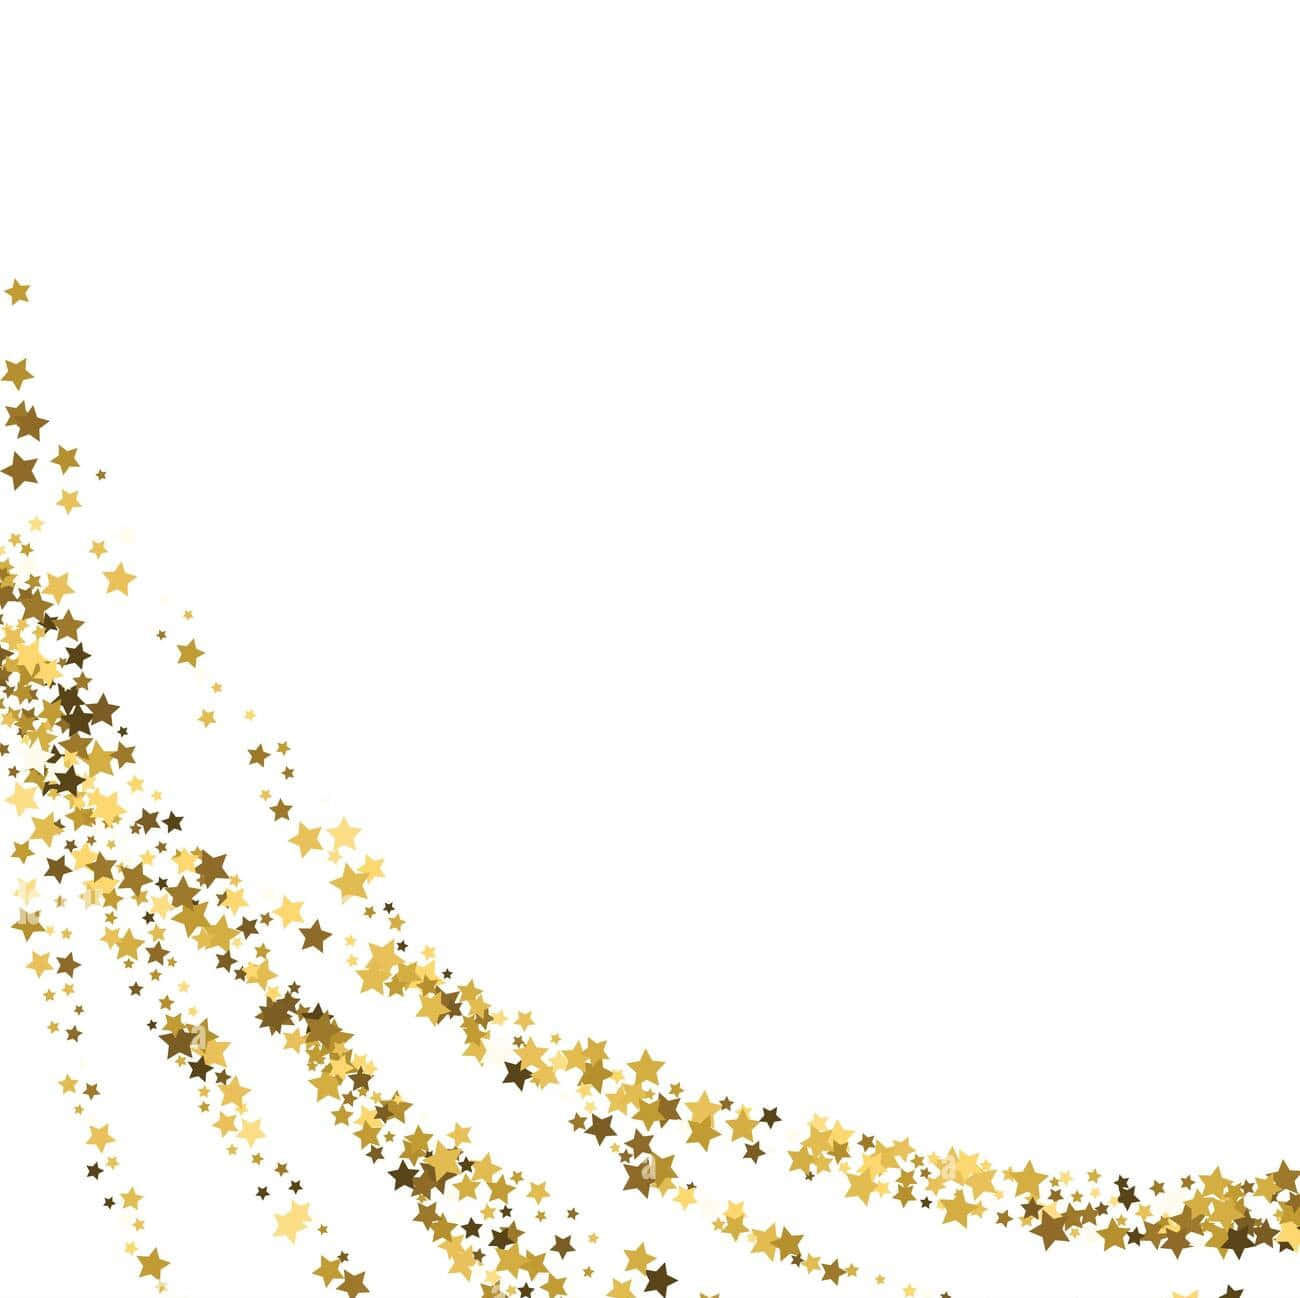 Add sparkling excitement to your celebrations with this golden confetti background